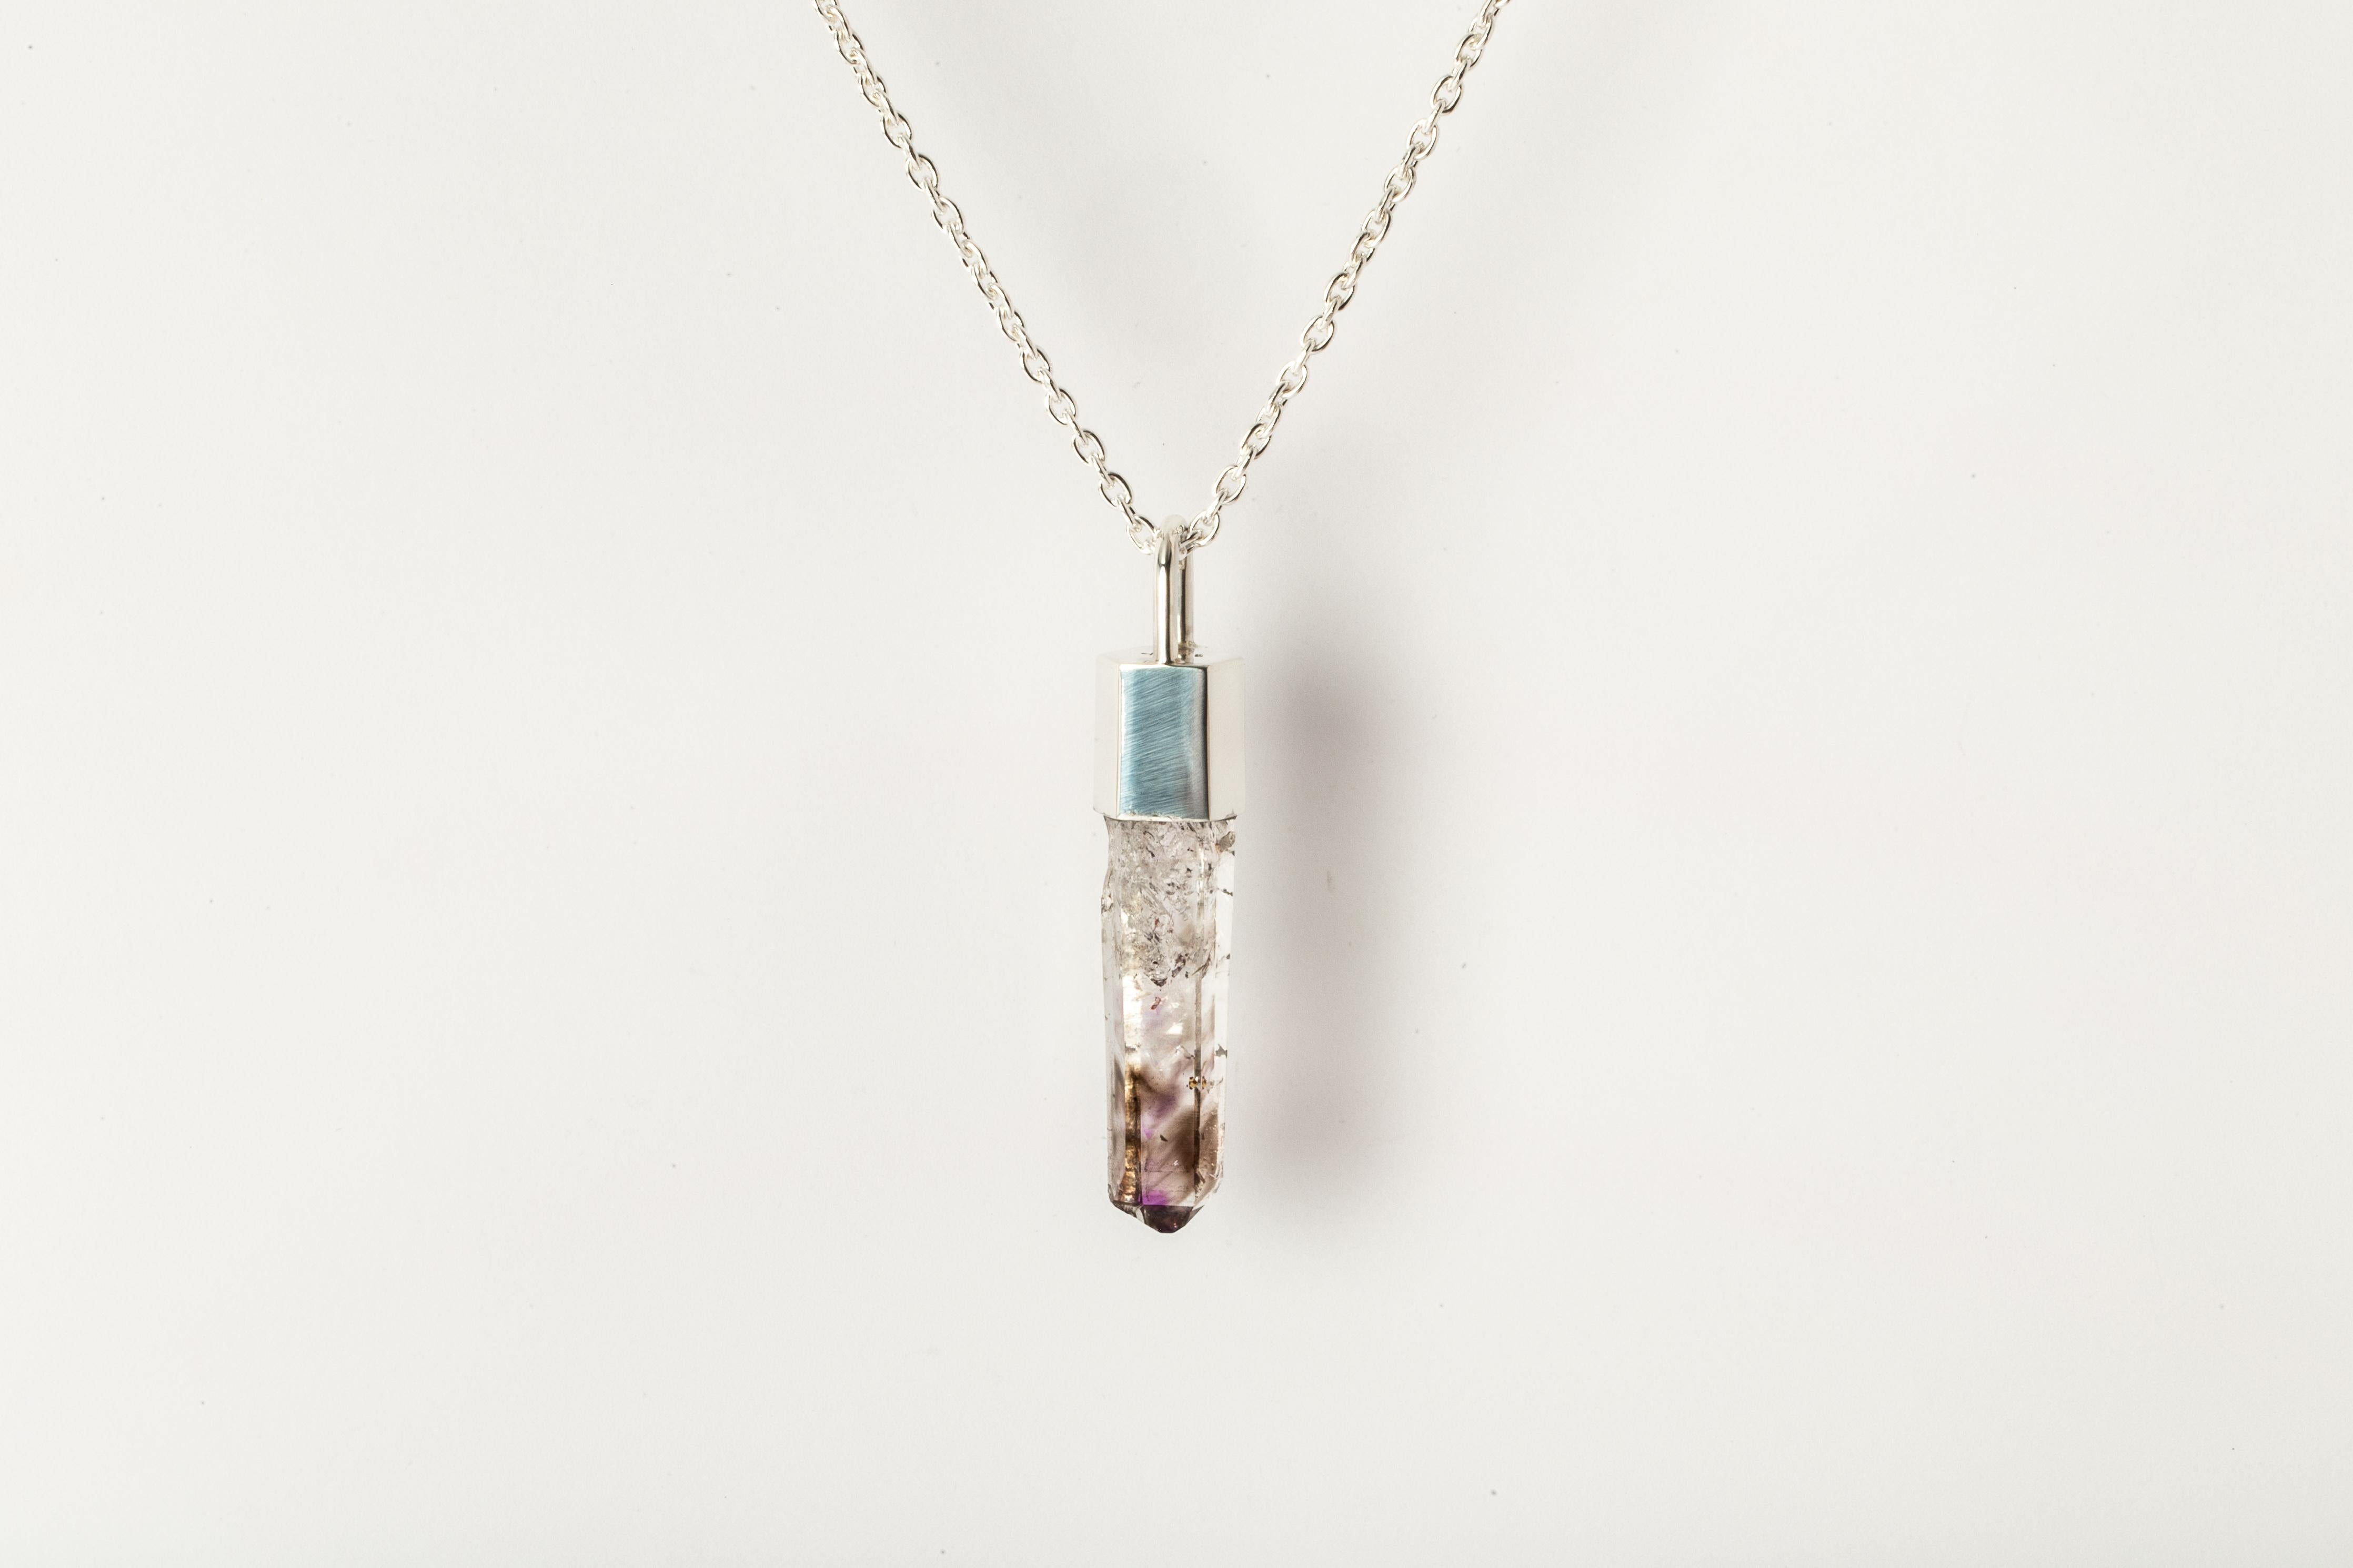 Necklace in polished sterling silver and a rough of brandnerg quartz. The Talisman series is an exploration into the power of natural crystals. Each product with the status of Specimen has a unique number and is absolutely one-of-a-kind.